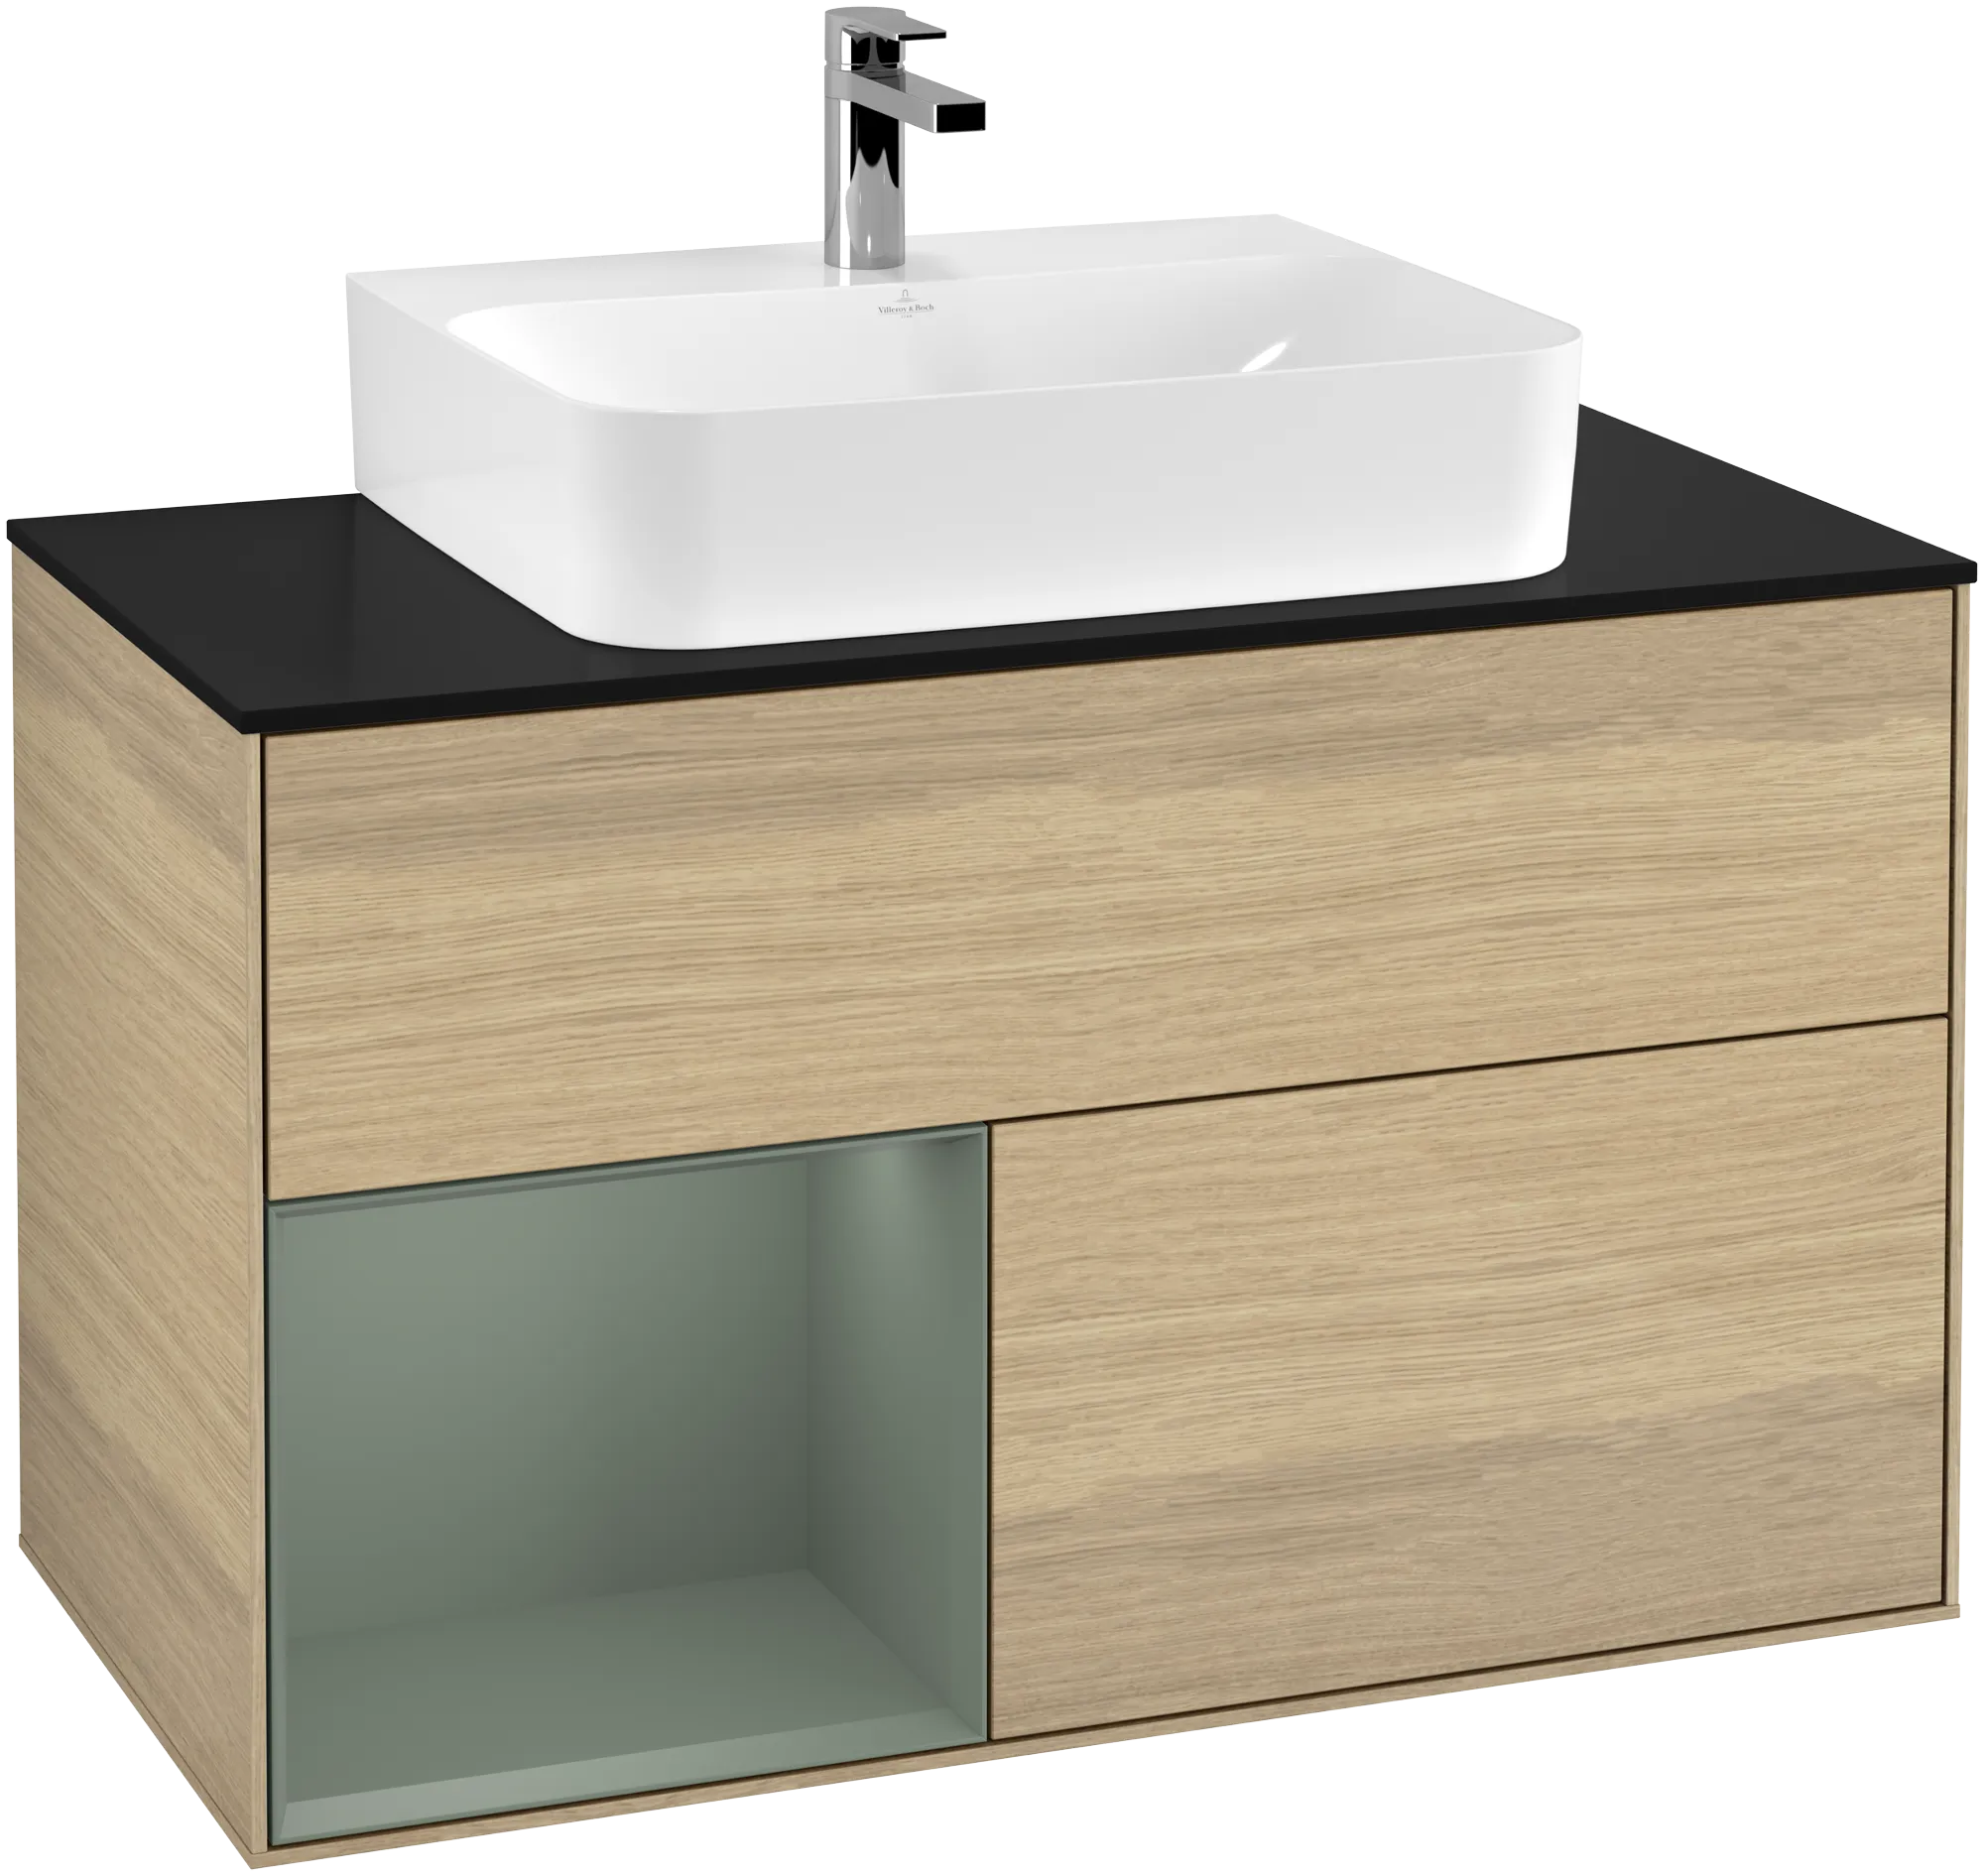 Picture of VILLEROY BOCH Finion Vanity unit, with lighting, 2 pull-out compartments, 1000 x 603 x 501 mm, Oak Veneer / Olive Matt Lacquer / Glass Black Matt #G112GMPC